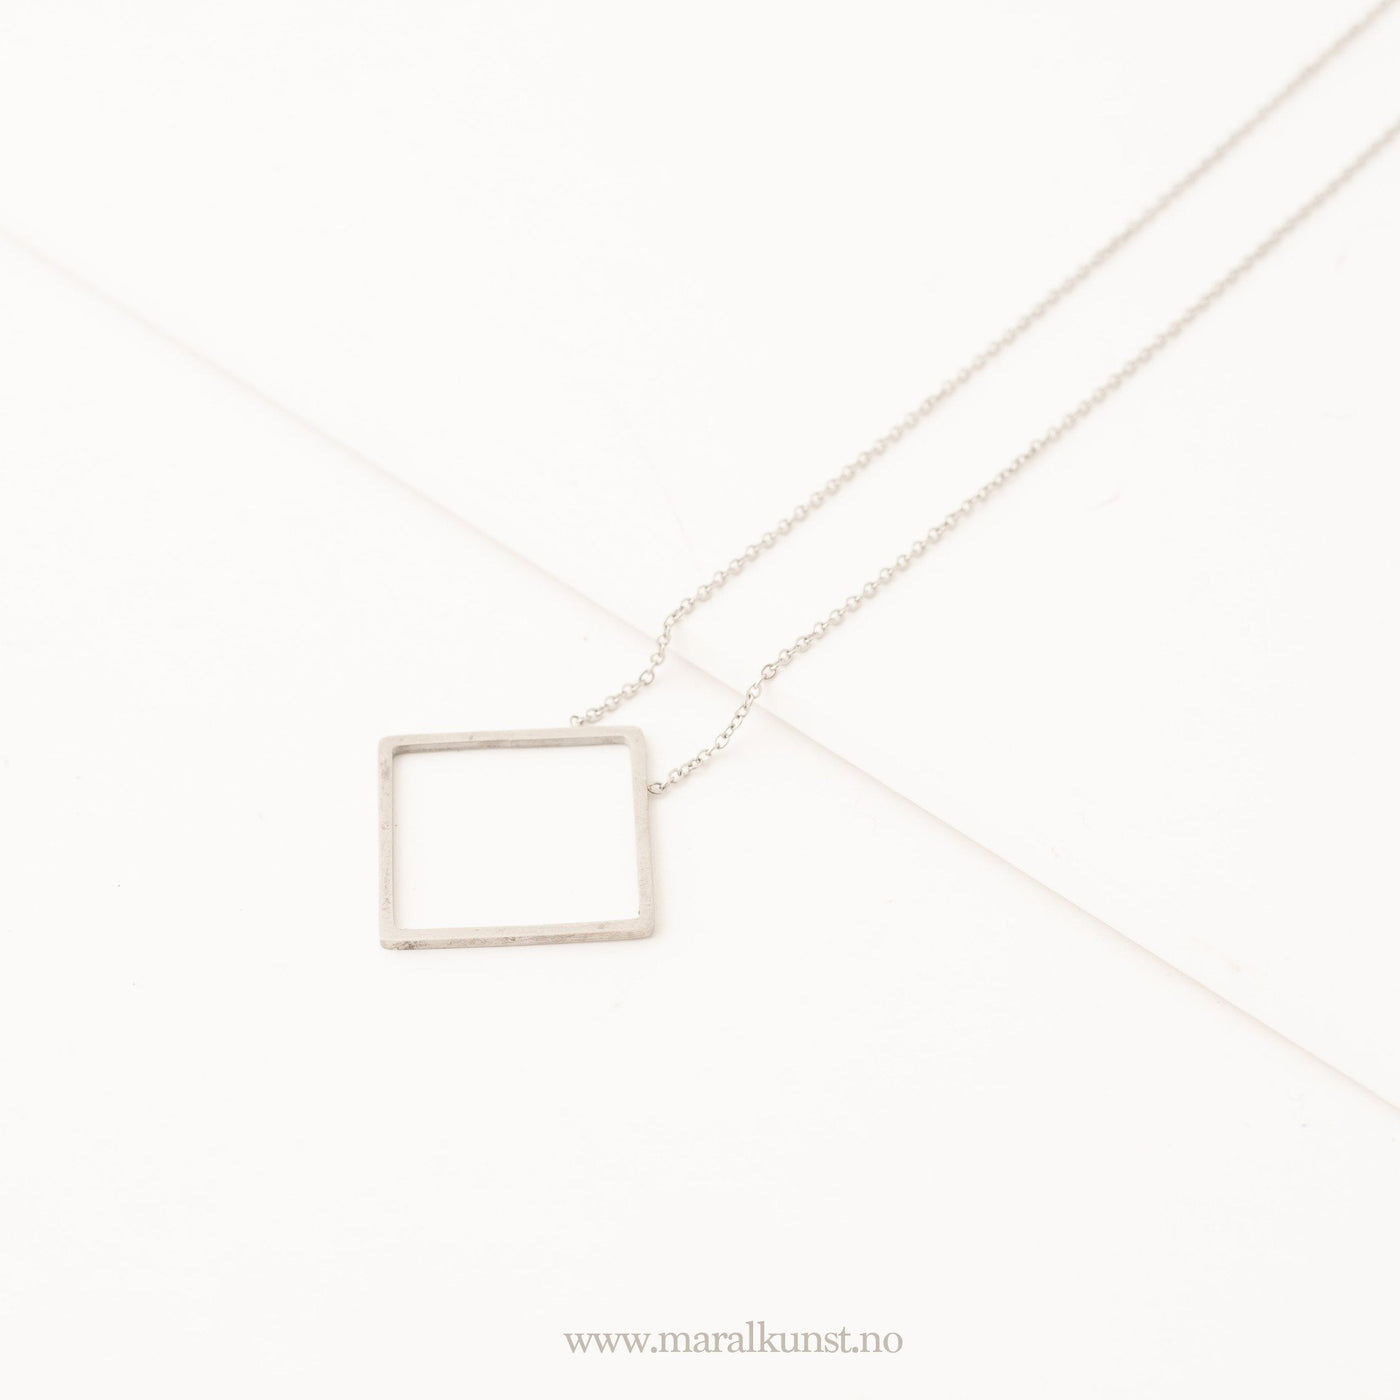 Stainless Steel Square Necklace - Maral Kunst Jewelry